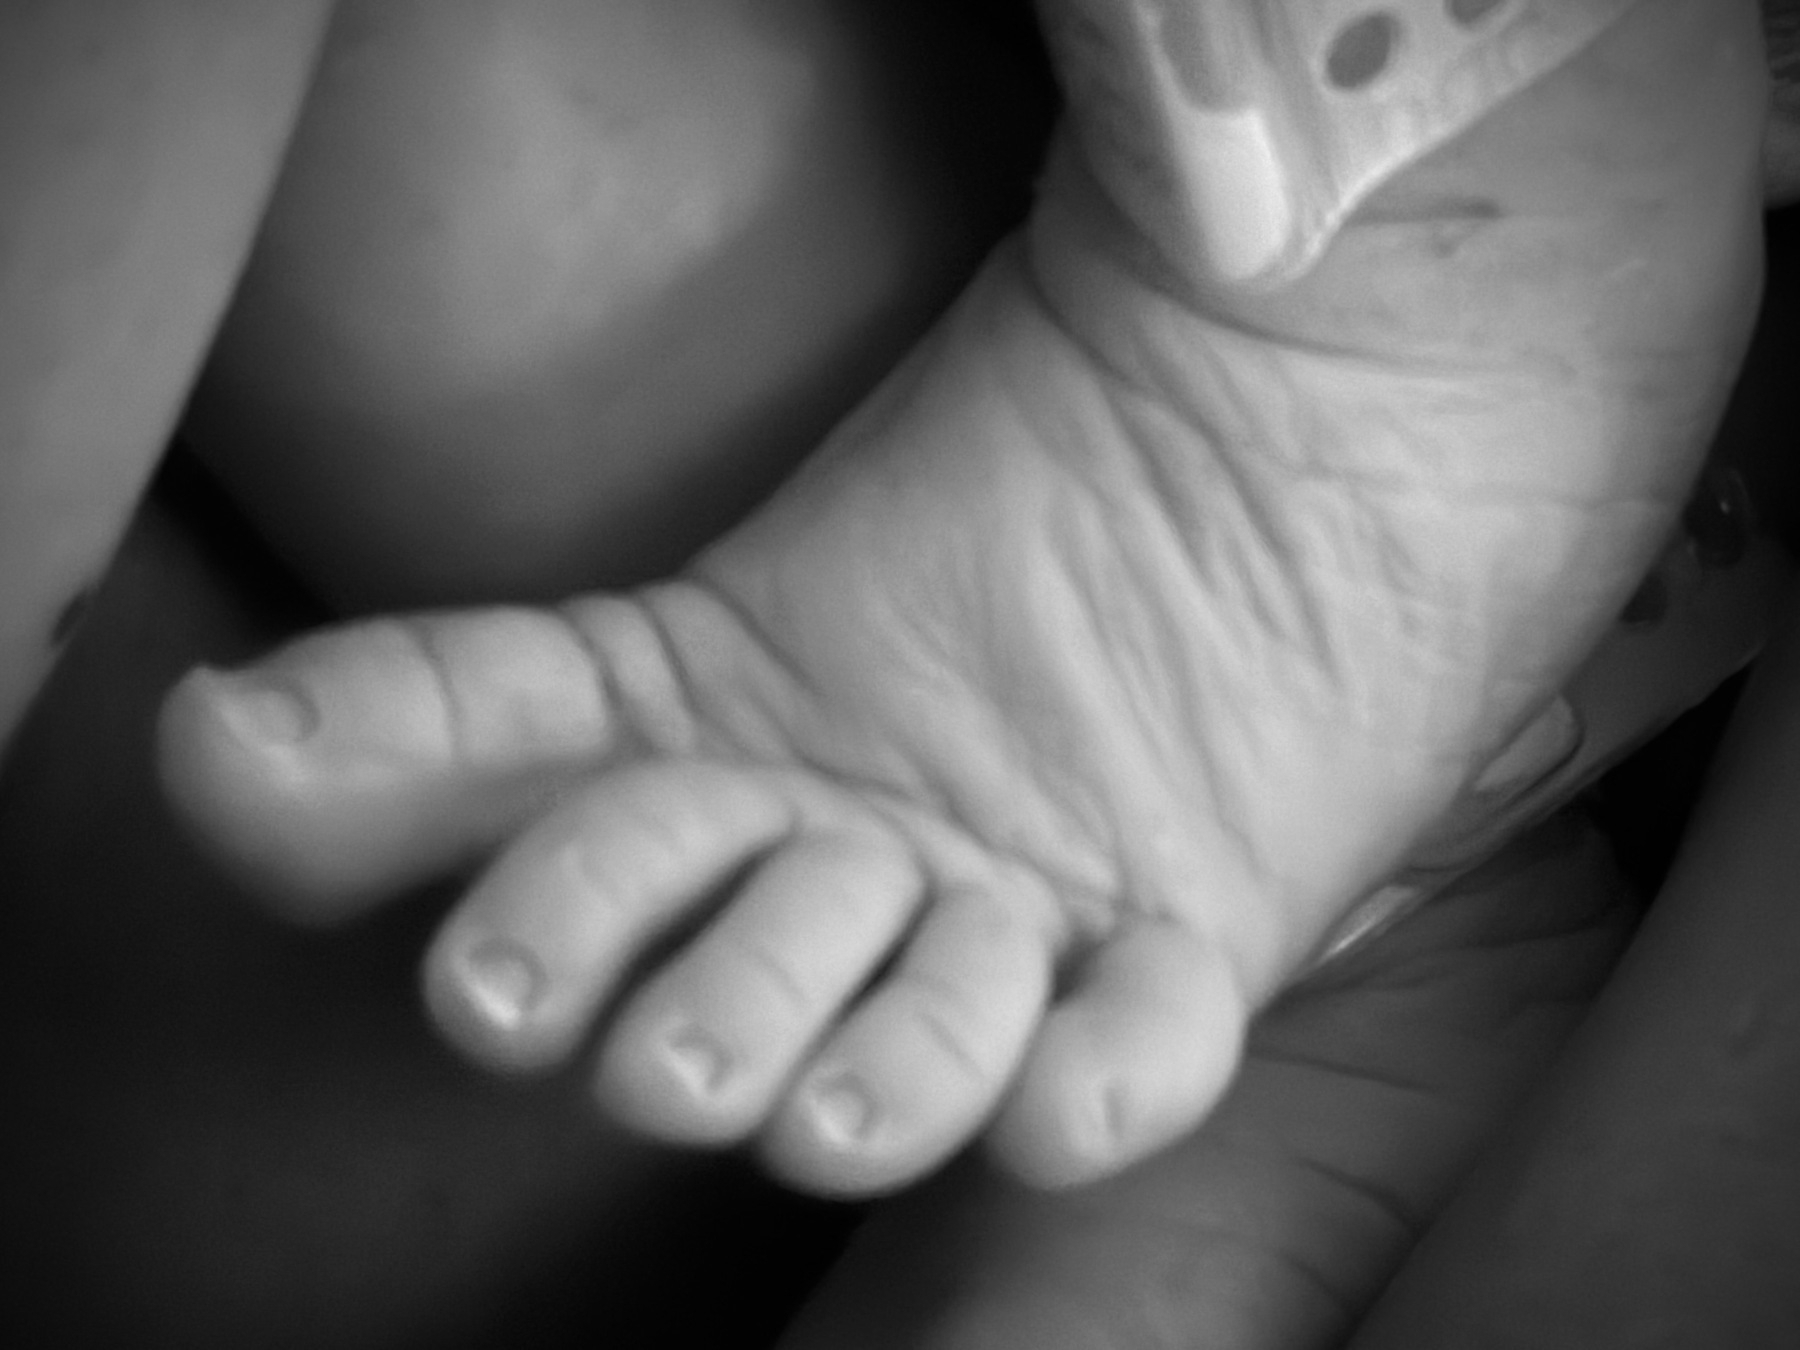 A B&W close up of a newborn baby's foot, toes splayed apart, a hospital ankle band just visible.